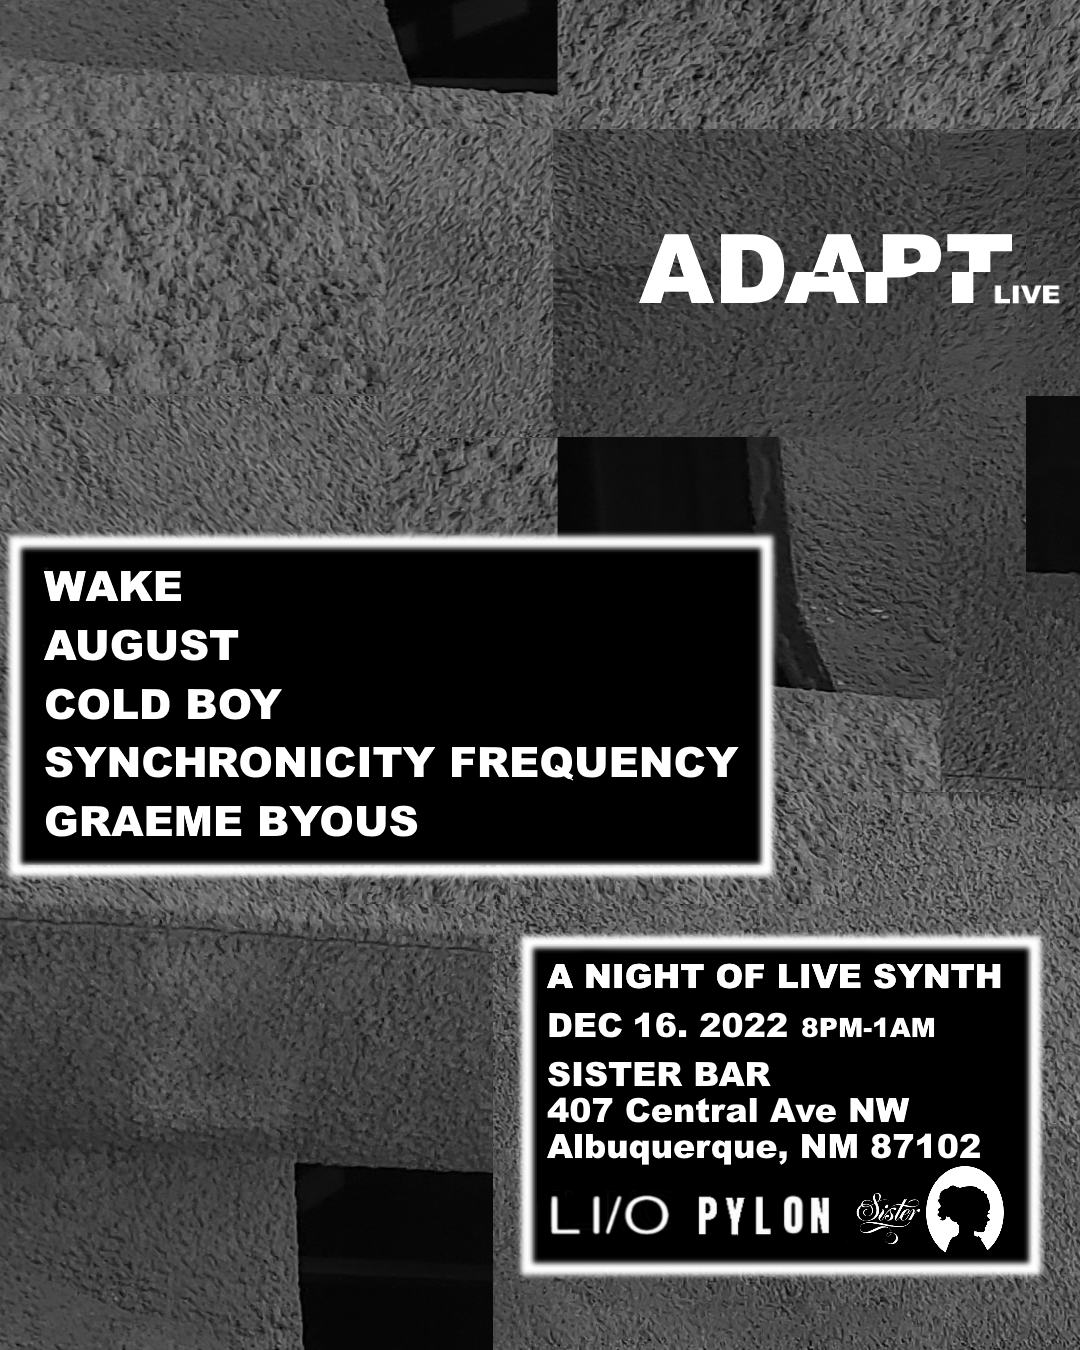 ADAPT: Live - A Night of Live Synth - Página frontal